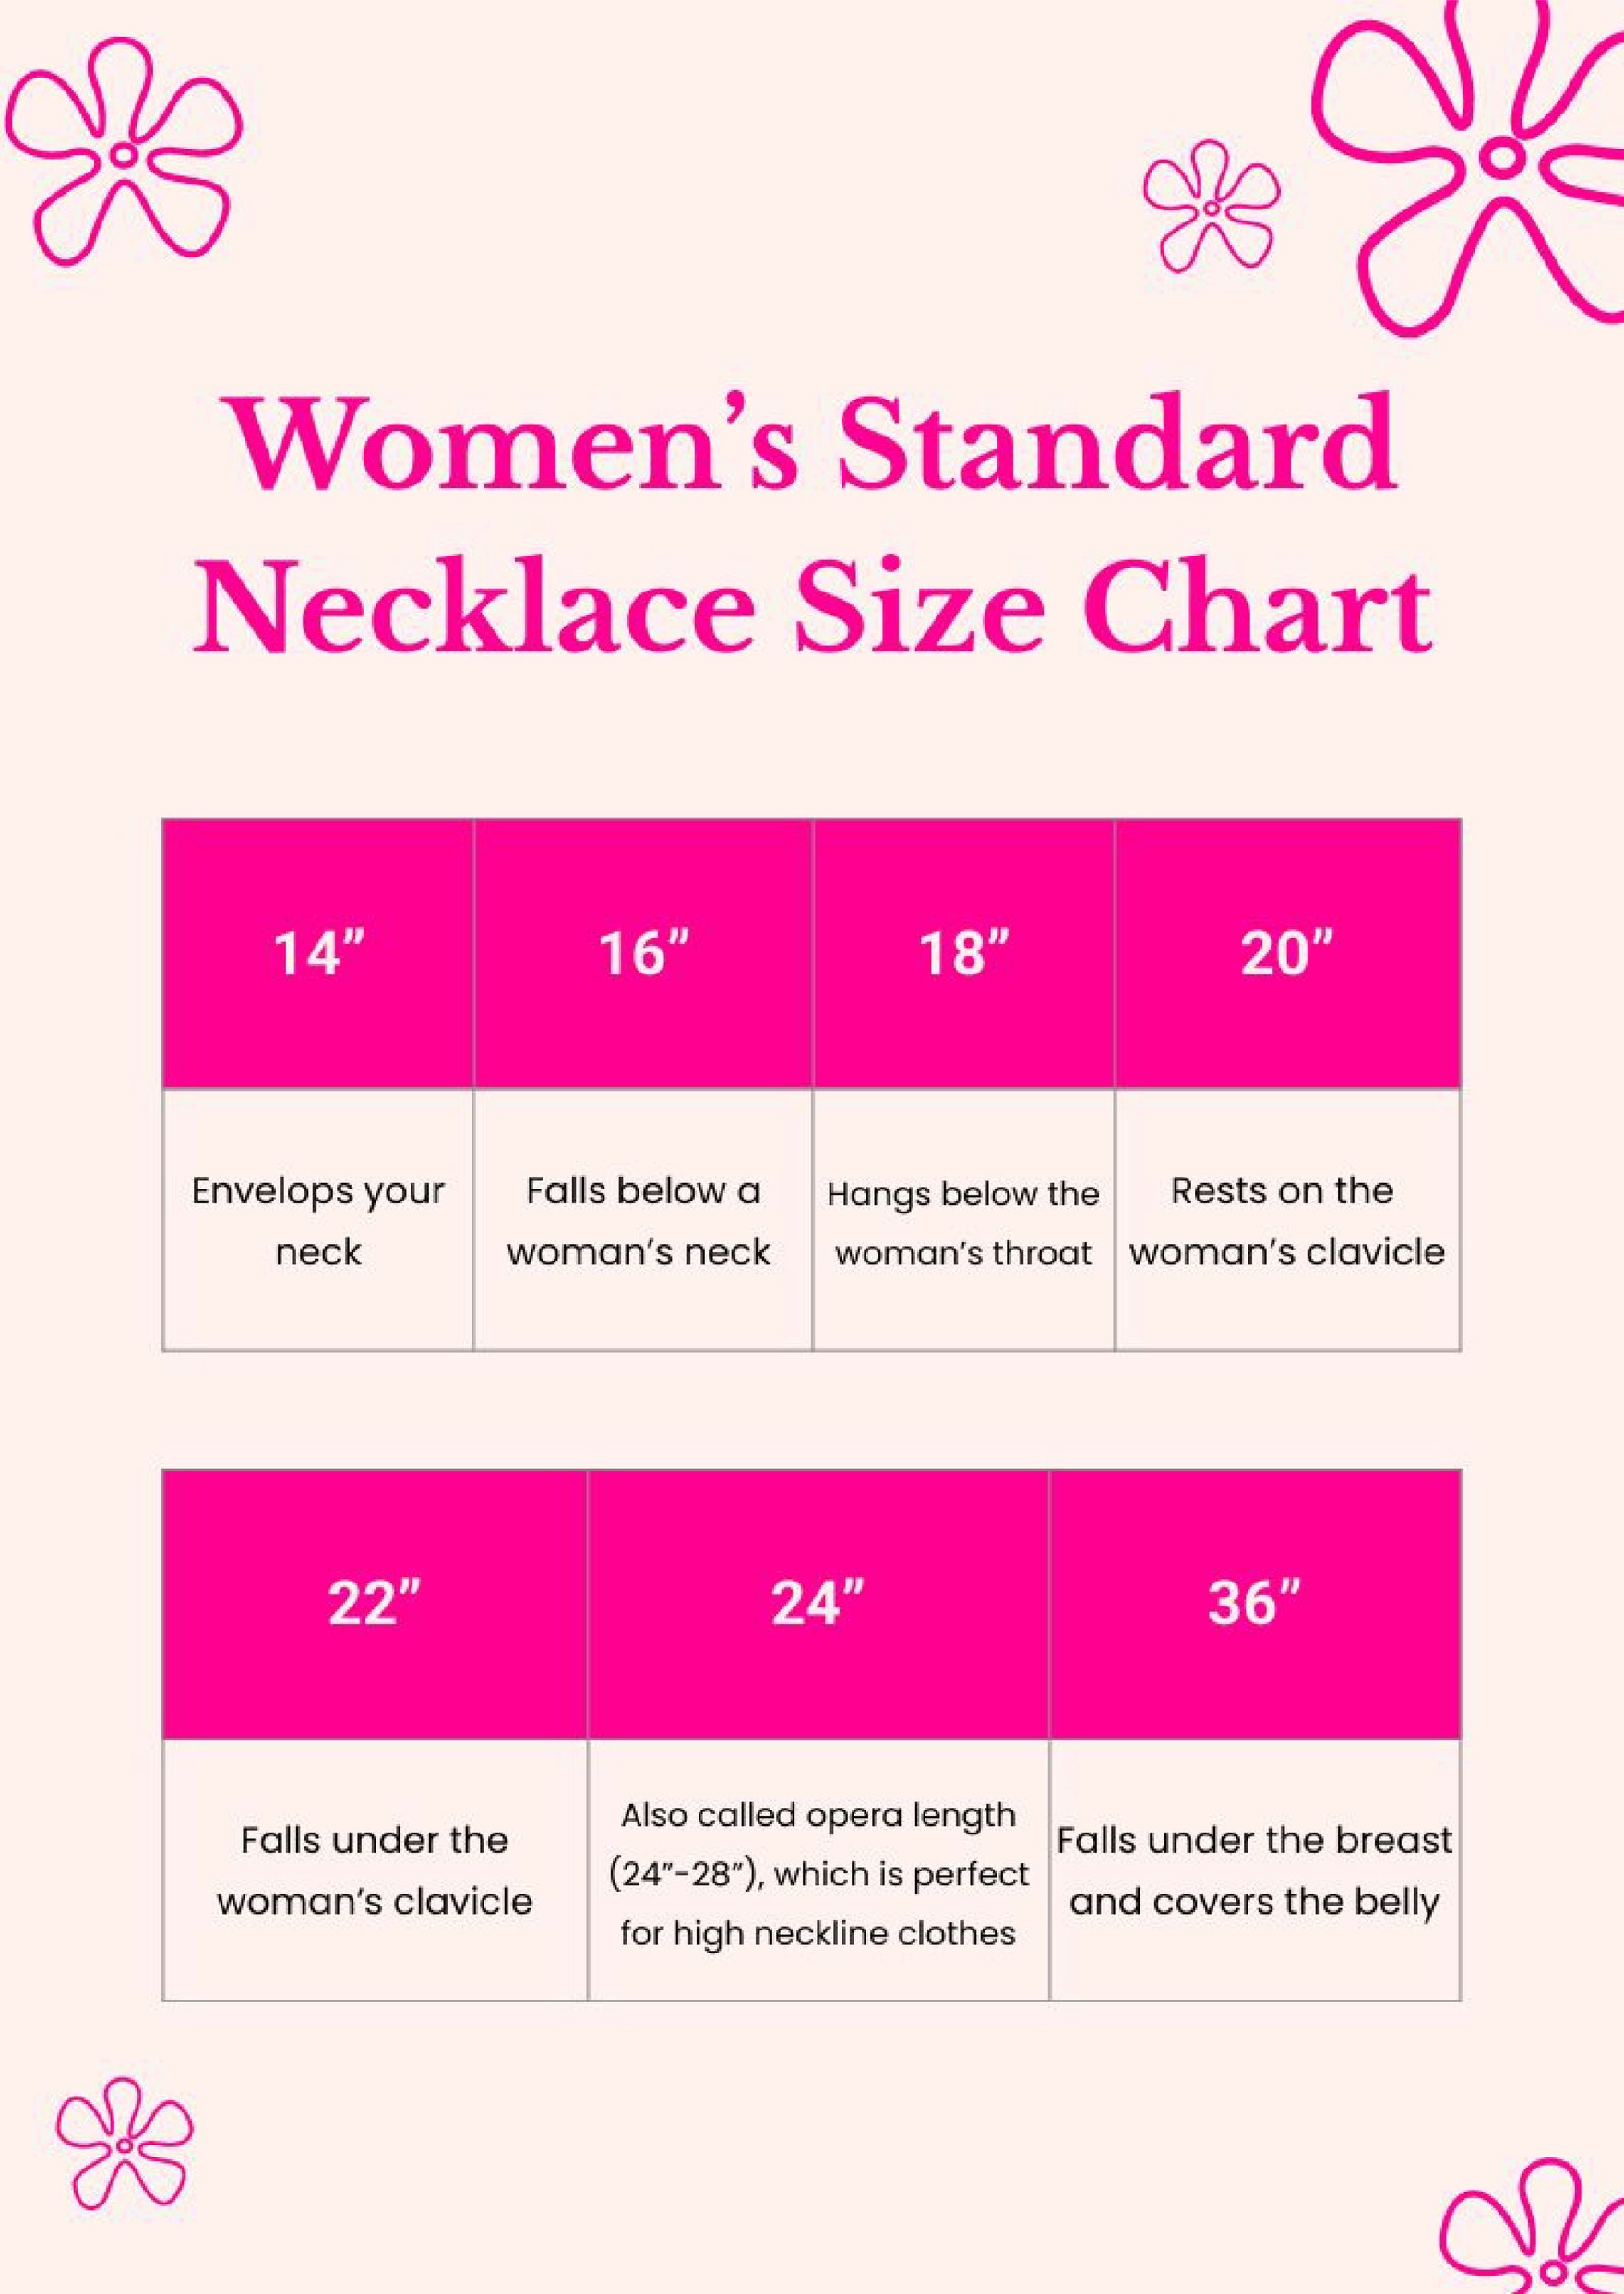 Necklace Size Chart For Women